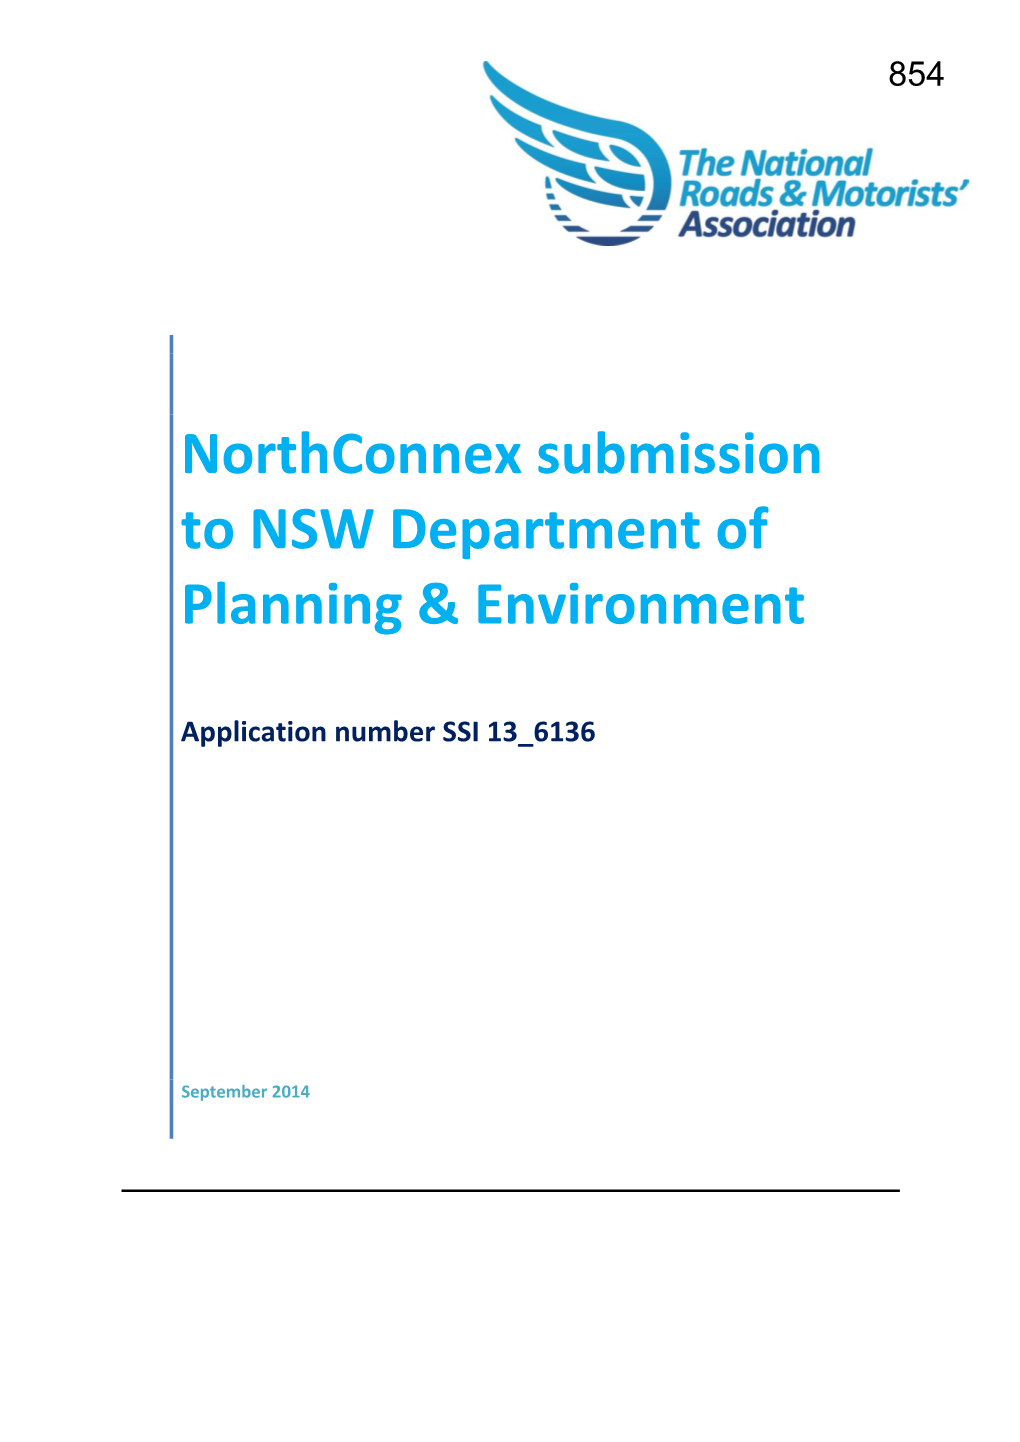 Northconnex Submission to NSW Department of Planning & Environment